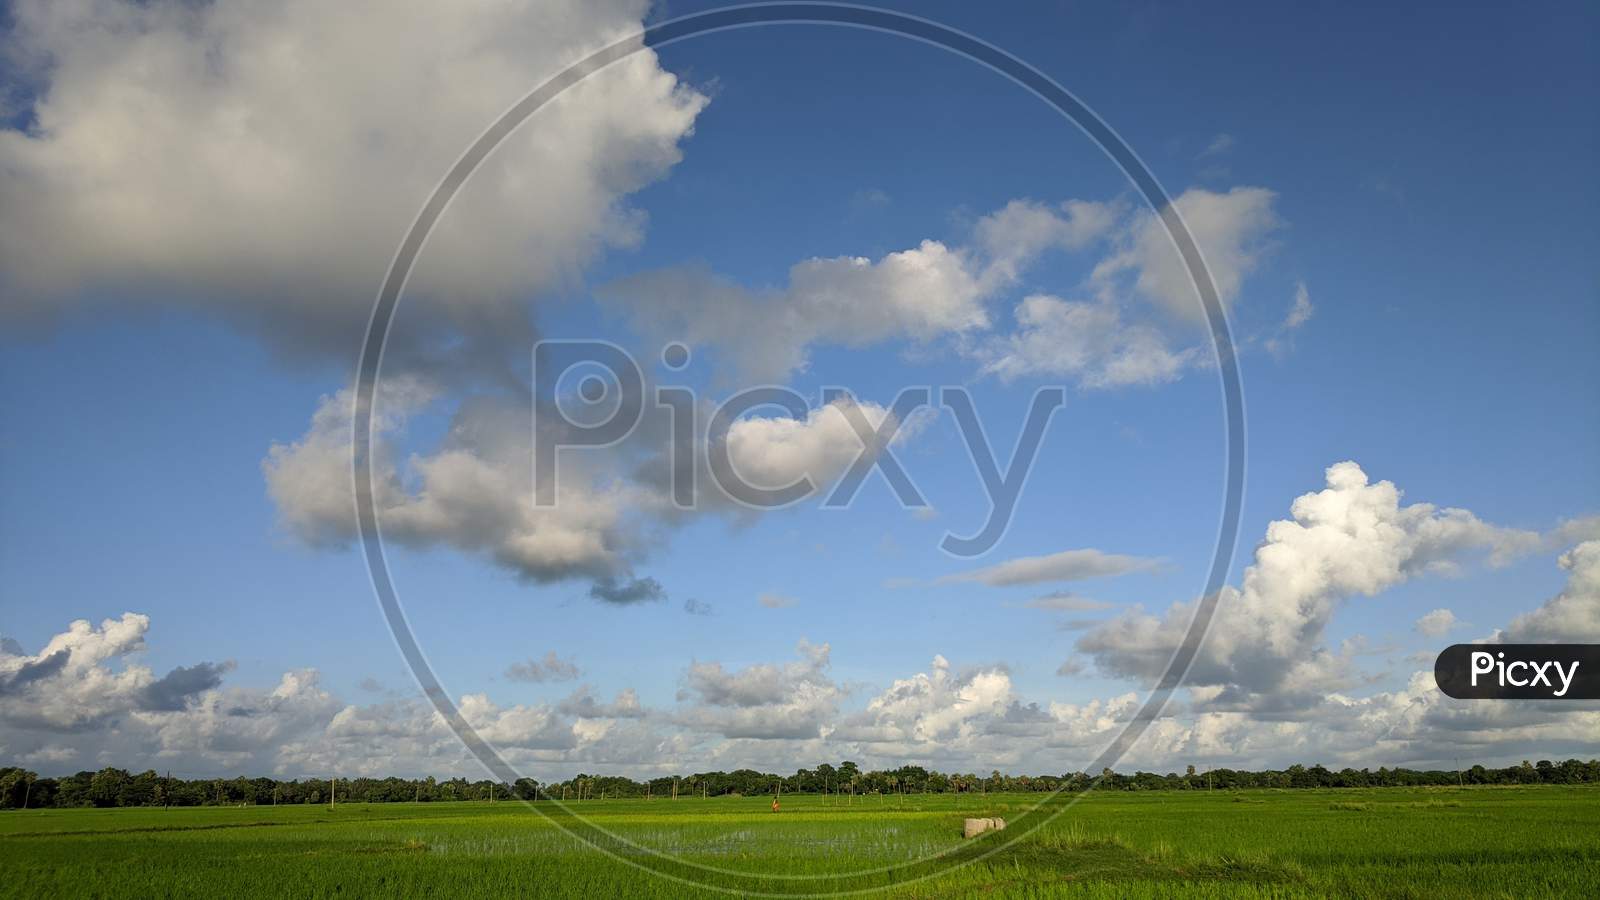 Paddy field with sky